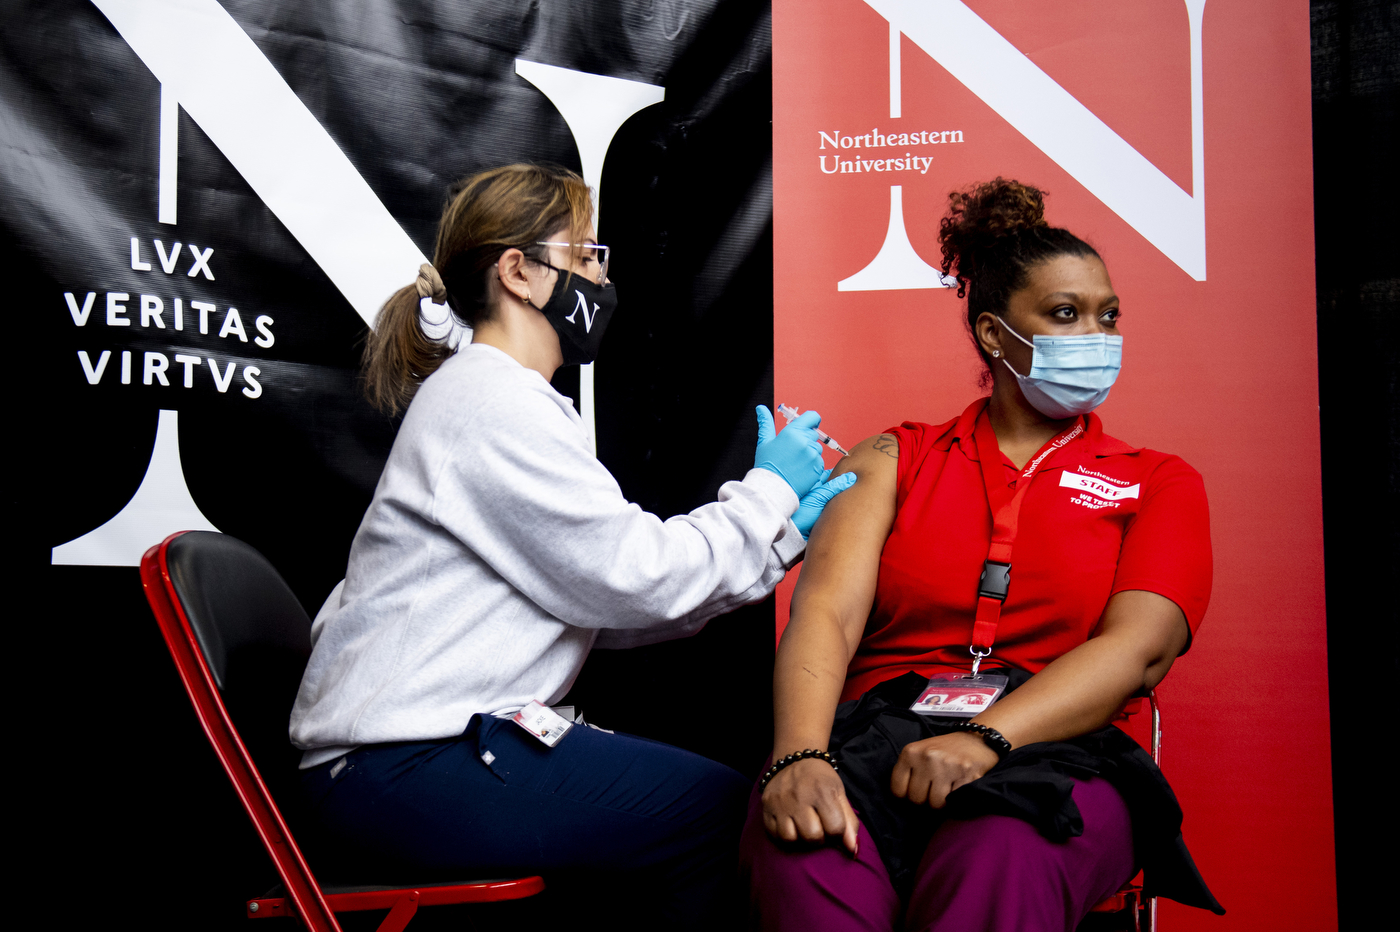 The Northeastern University launches COVID-19 vaccinations